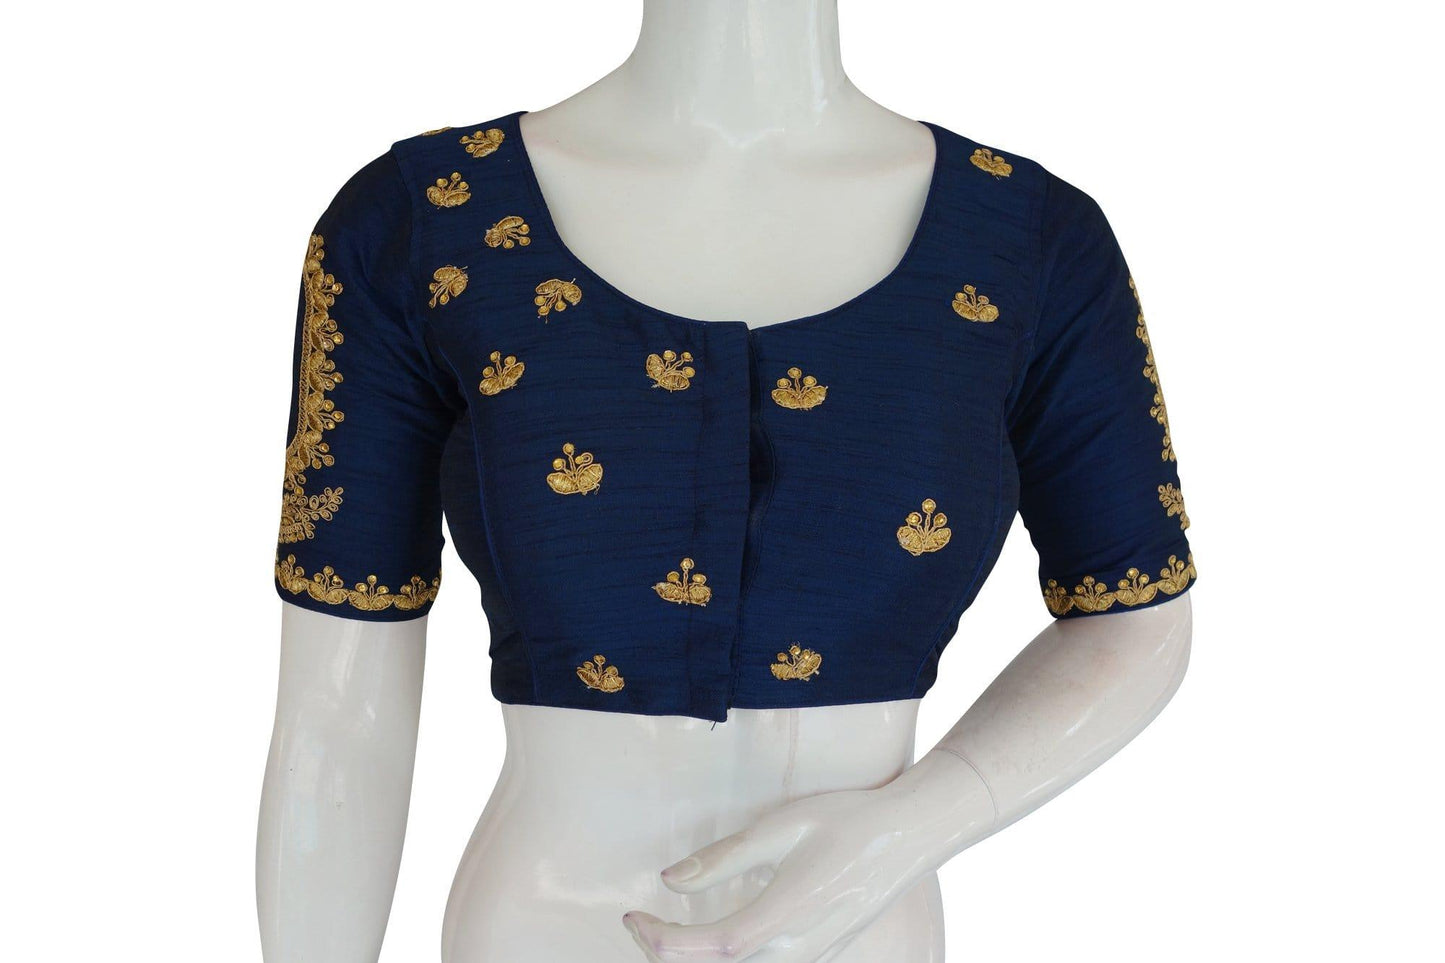 Enhance your ethnic ensemble with our Blue High Neck Embroidered Readymade Blouse, featuring exquisite mirror detailing and crafted in the traditional Indian crop top style, exuding elegance and sophistication.